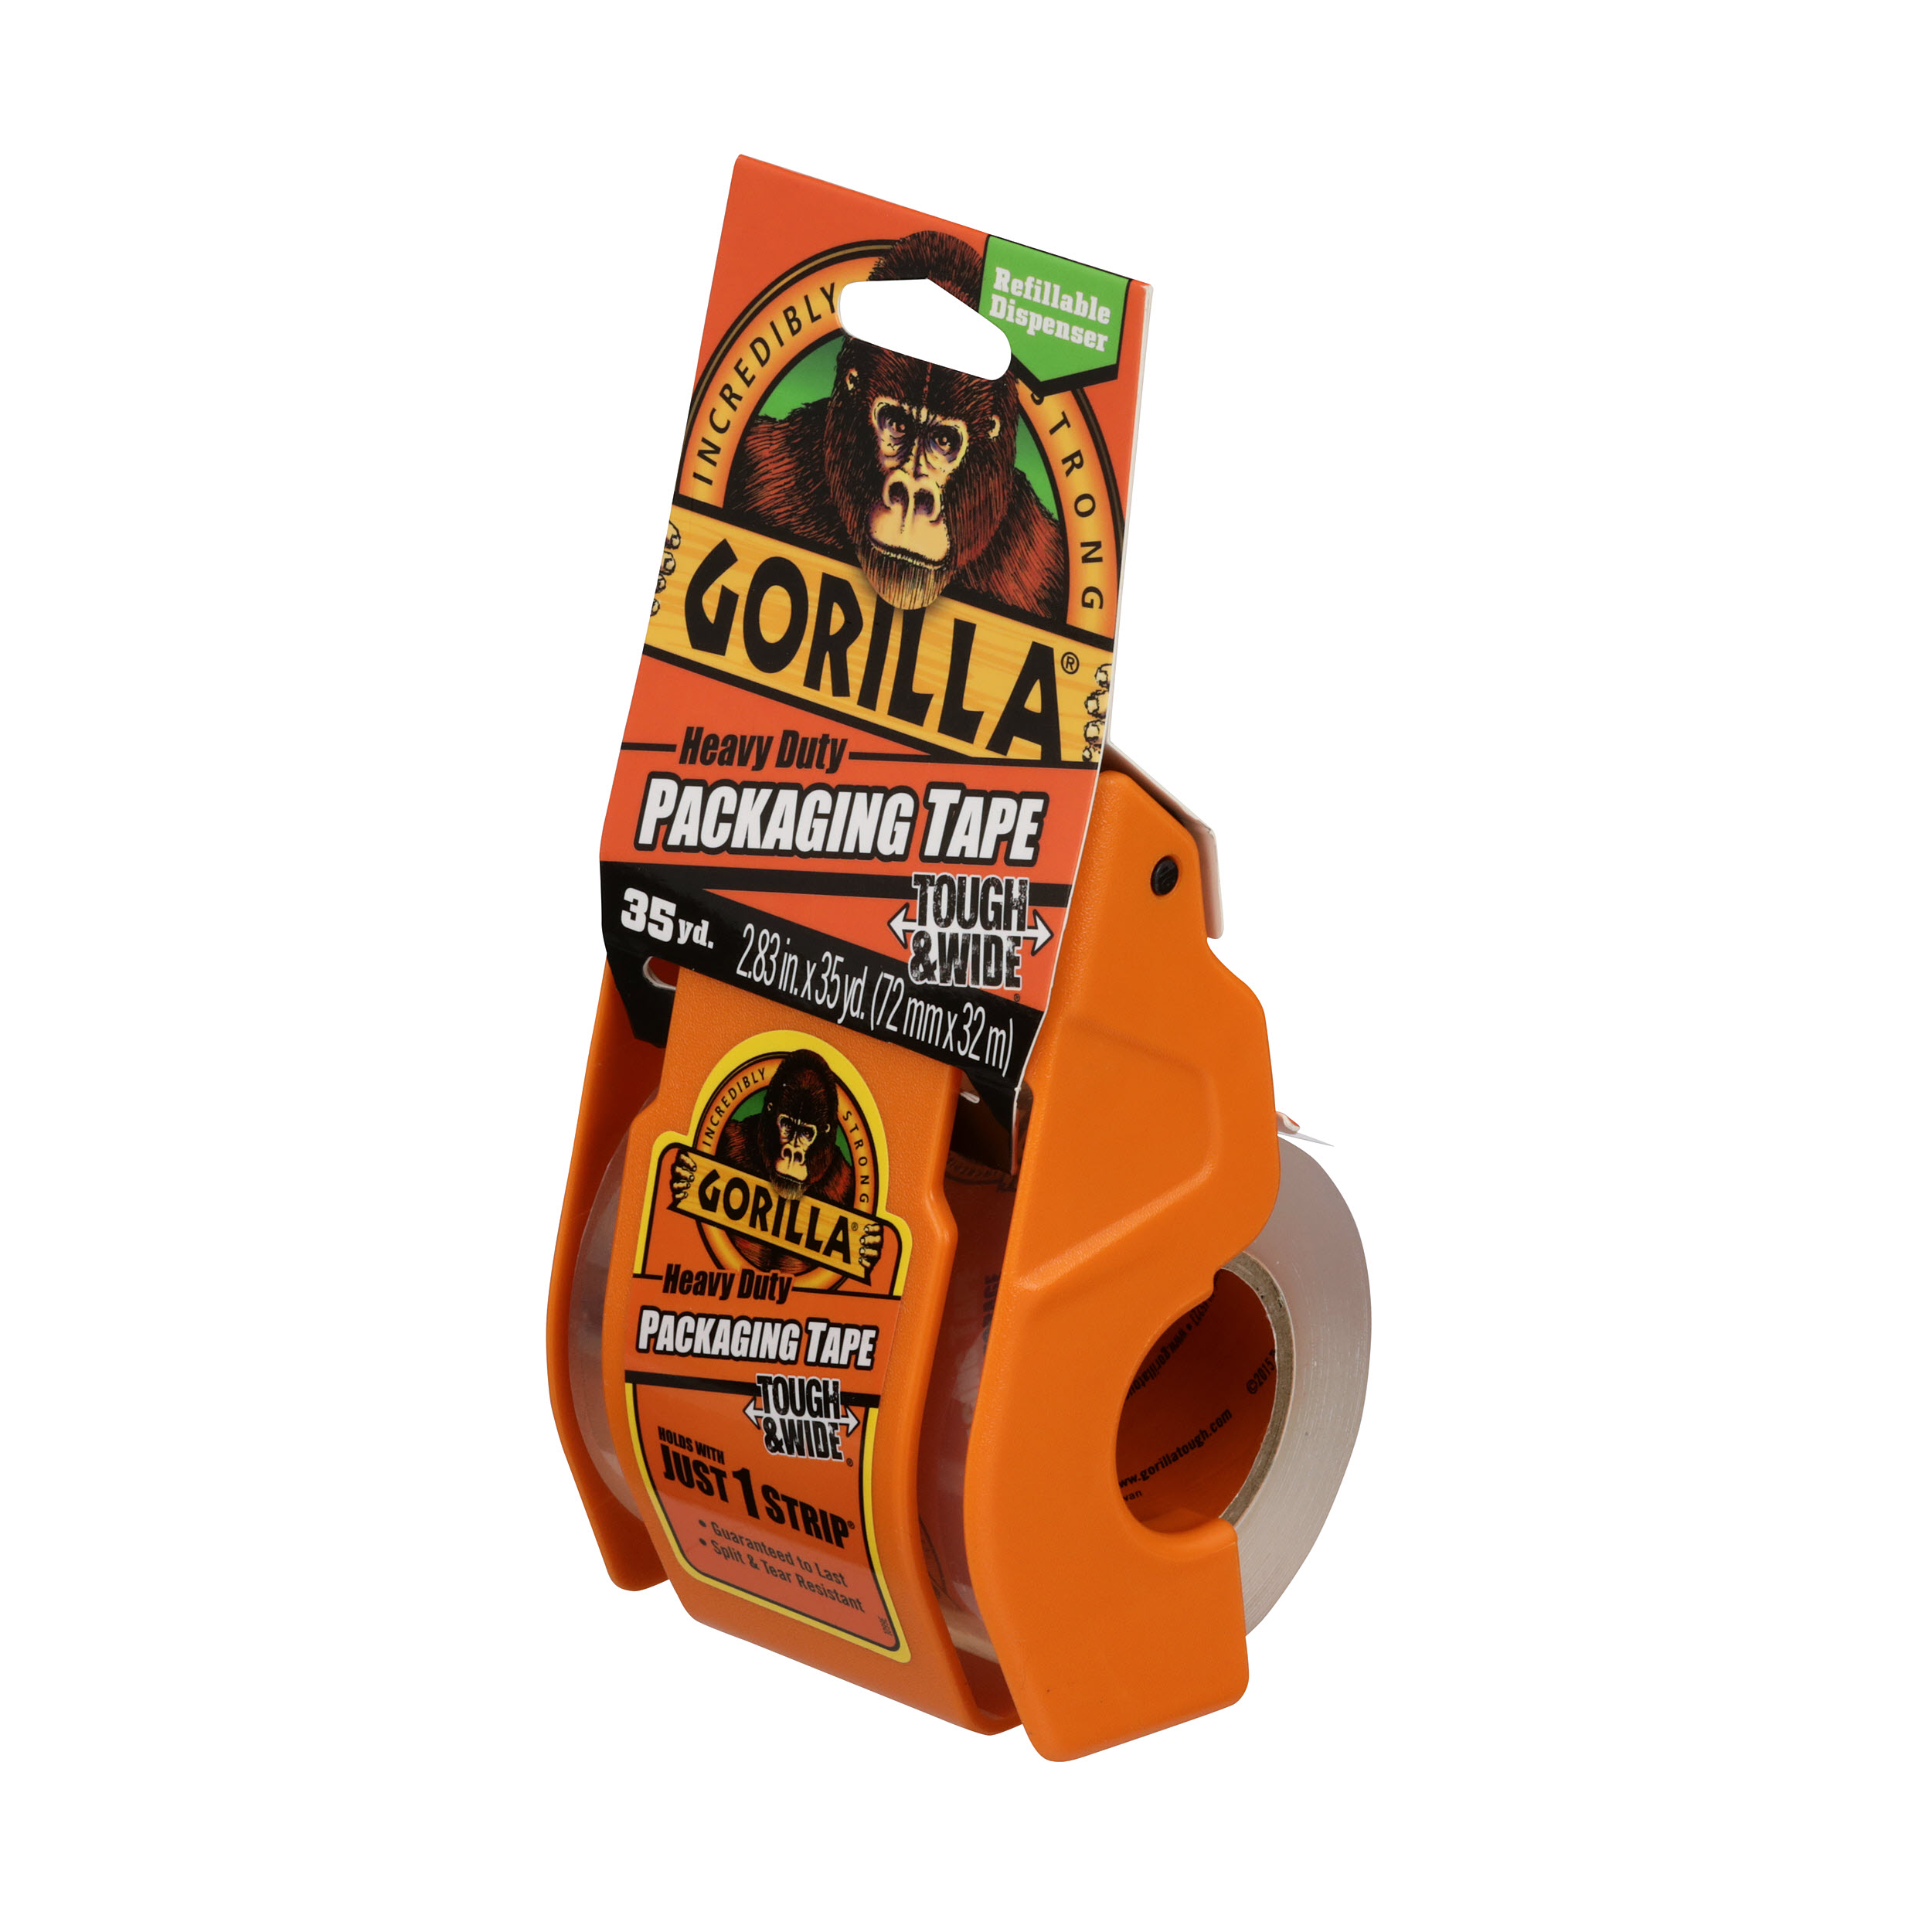 Gorilla Glue Double-Sided Tape, Gray Roll Assembled Product Weight